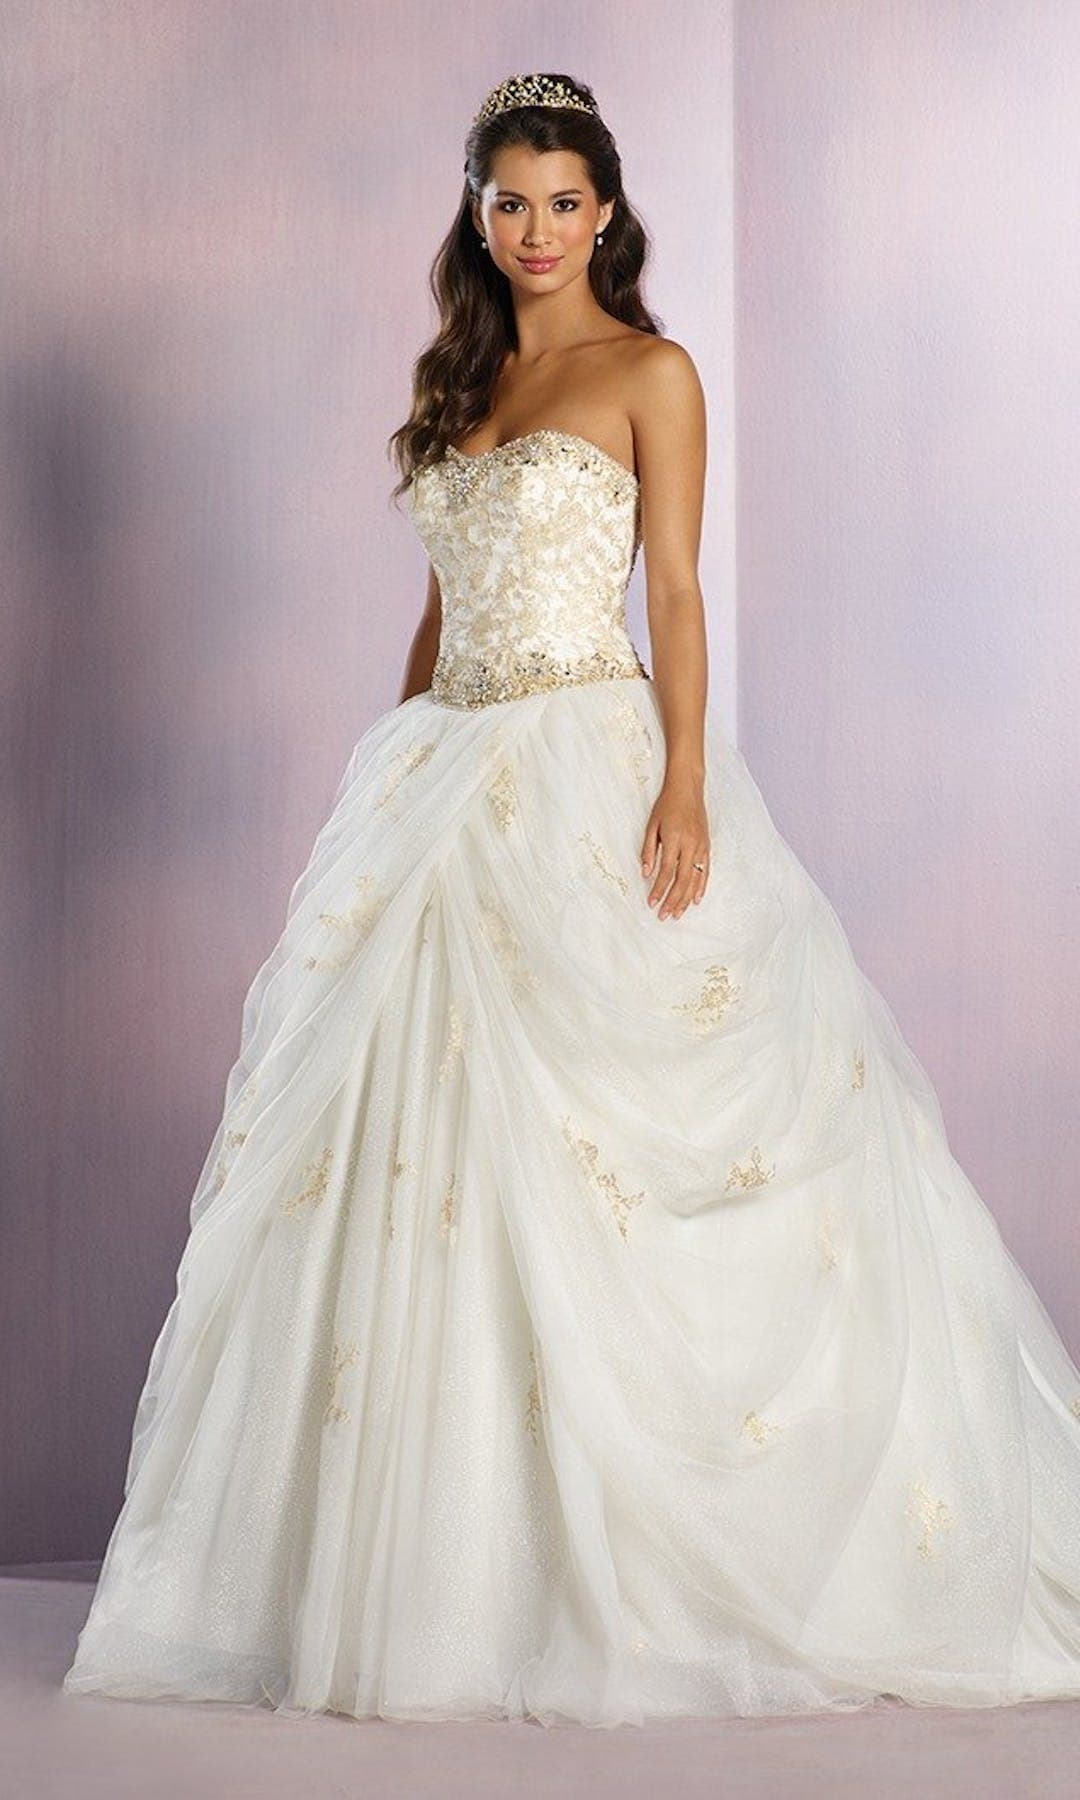 [For Rent ONLY] Belle Disney Fairy Tale Wedding Dress in Ivory /Gold (Ballgown) - AA254 - Blossom Wedding